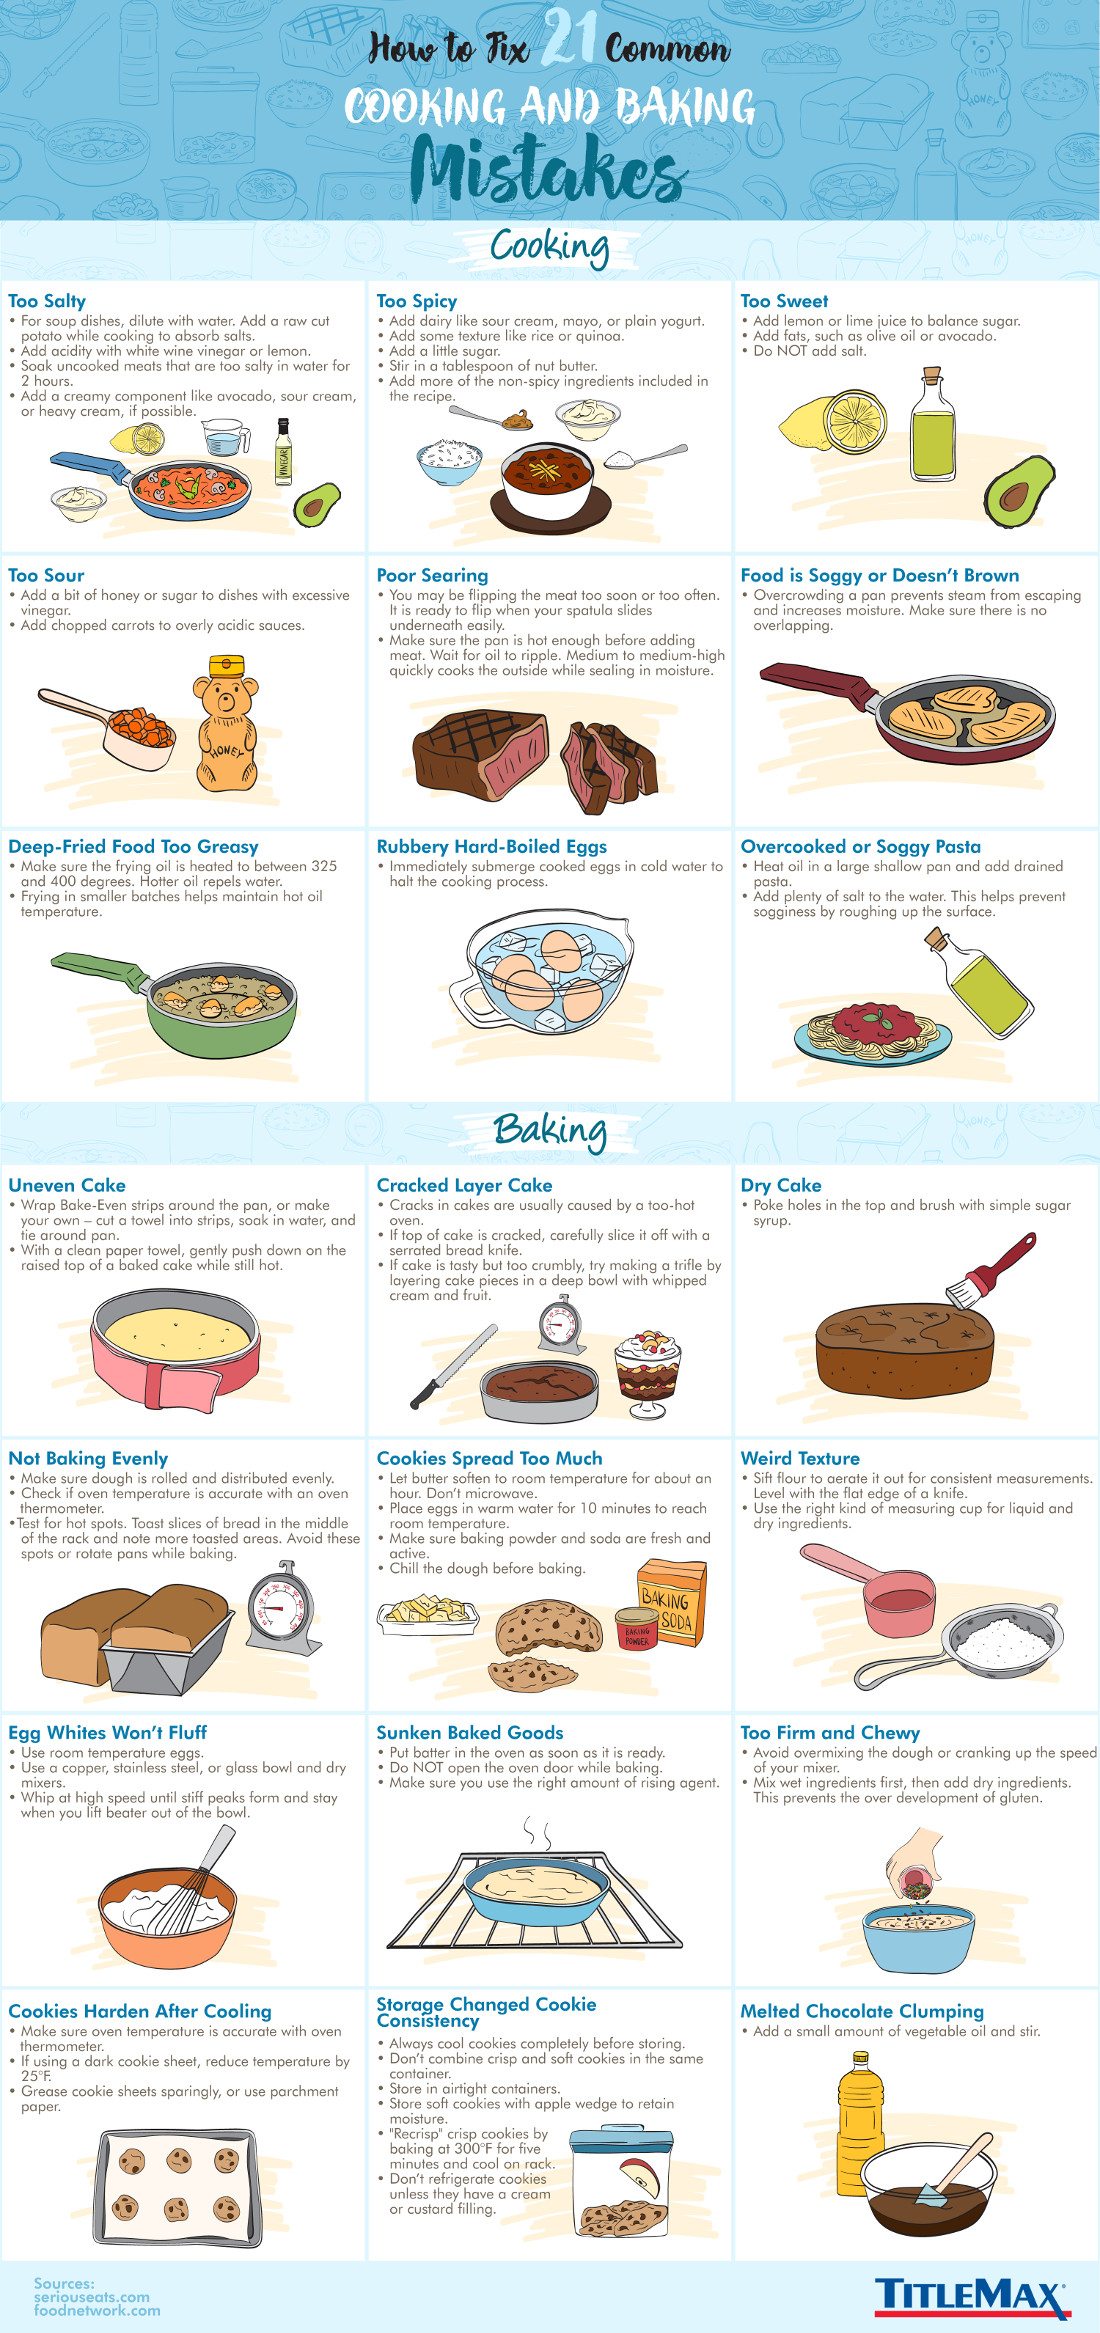 21 Common Cooking and Baking Mistakes – 21 Great Solutions! - Infographic